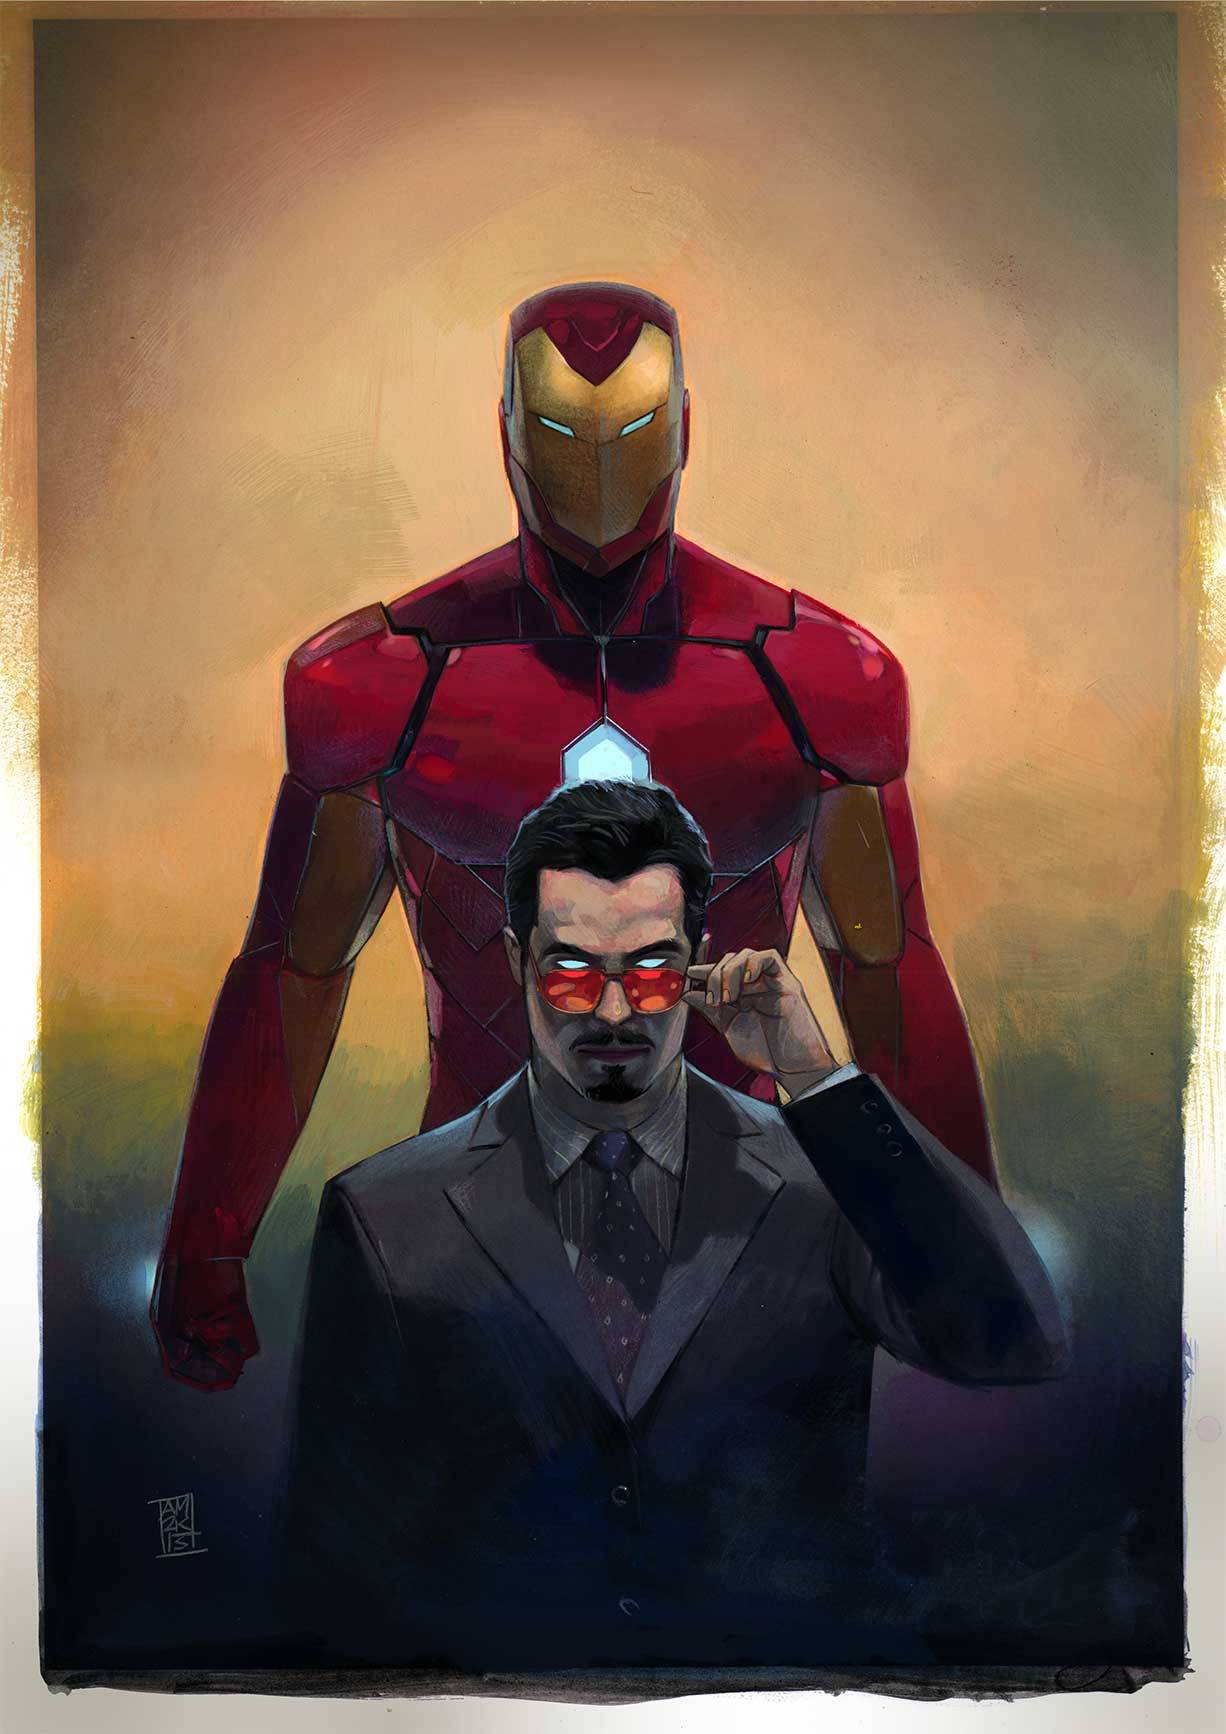 INVInCIBLE IRONMAN variant cover for issue 1